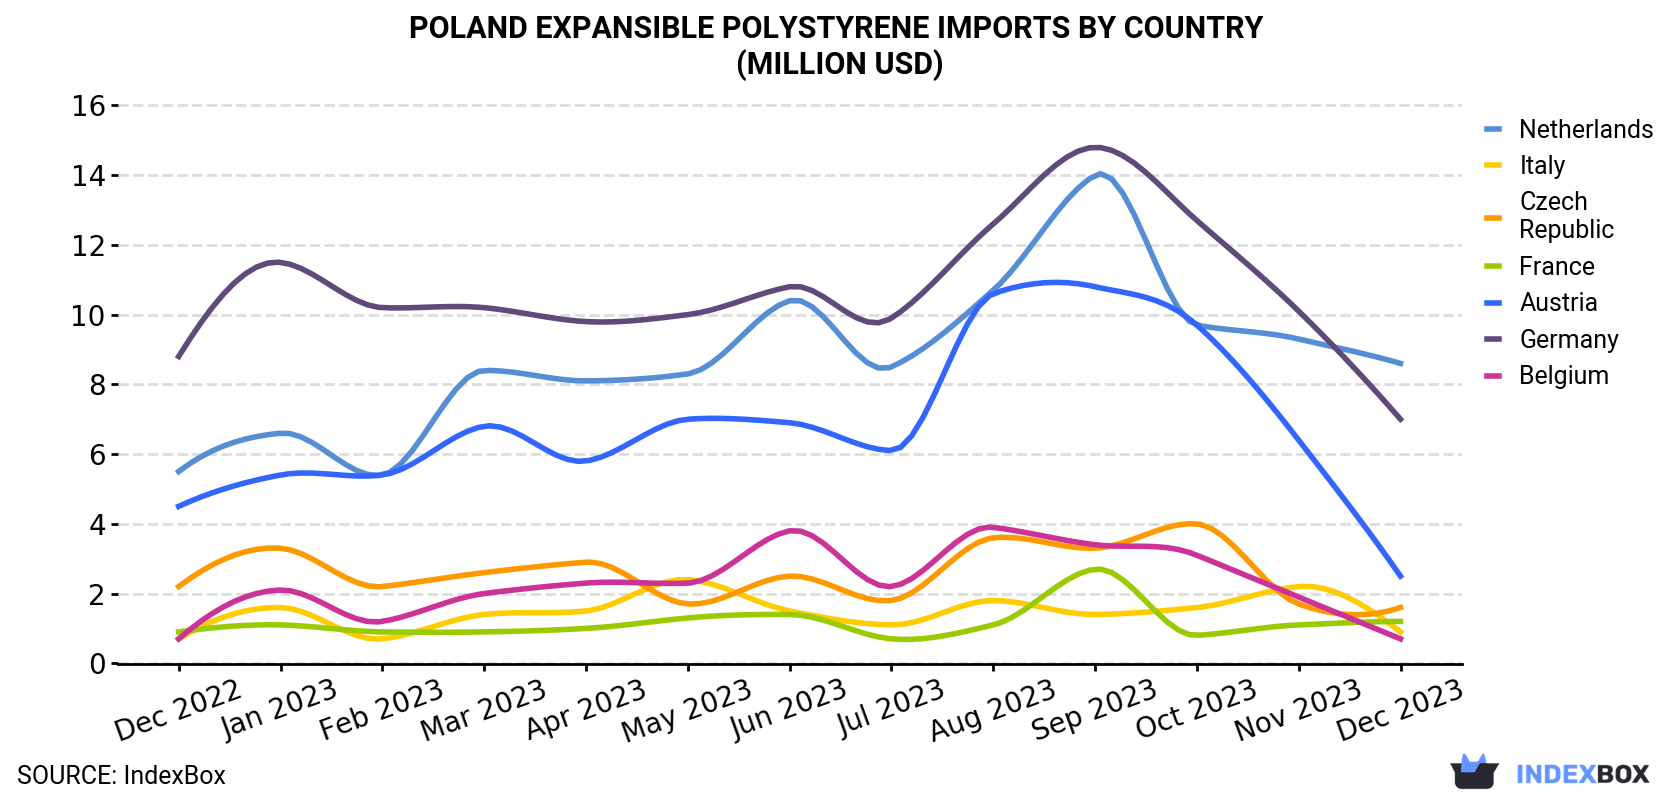 Poland Expansible Polystyrene Imports By Country (Million USD)